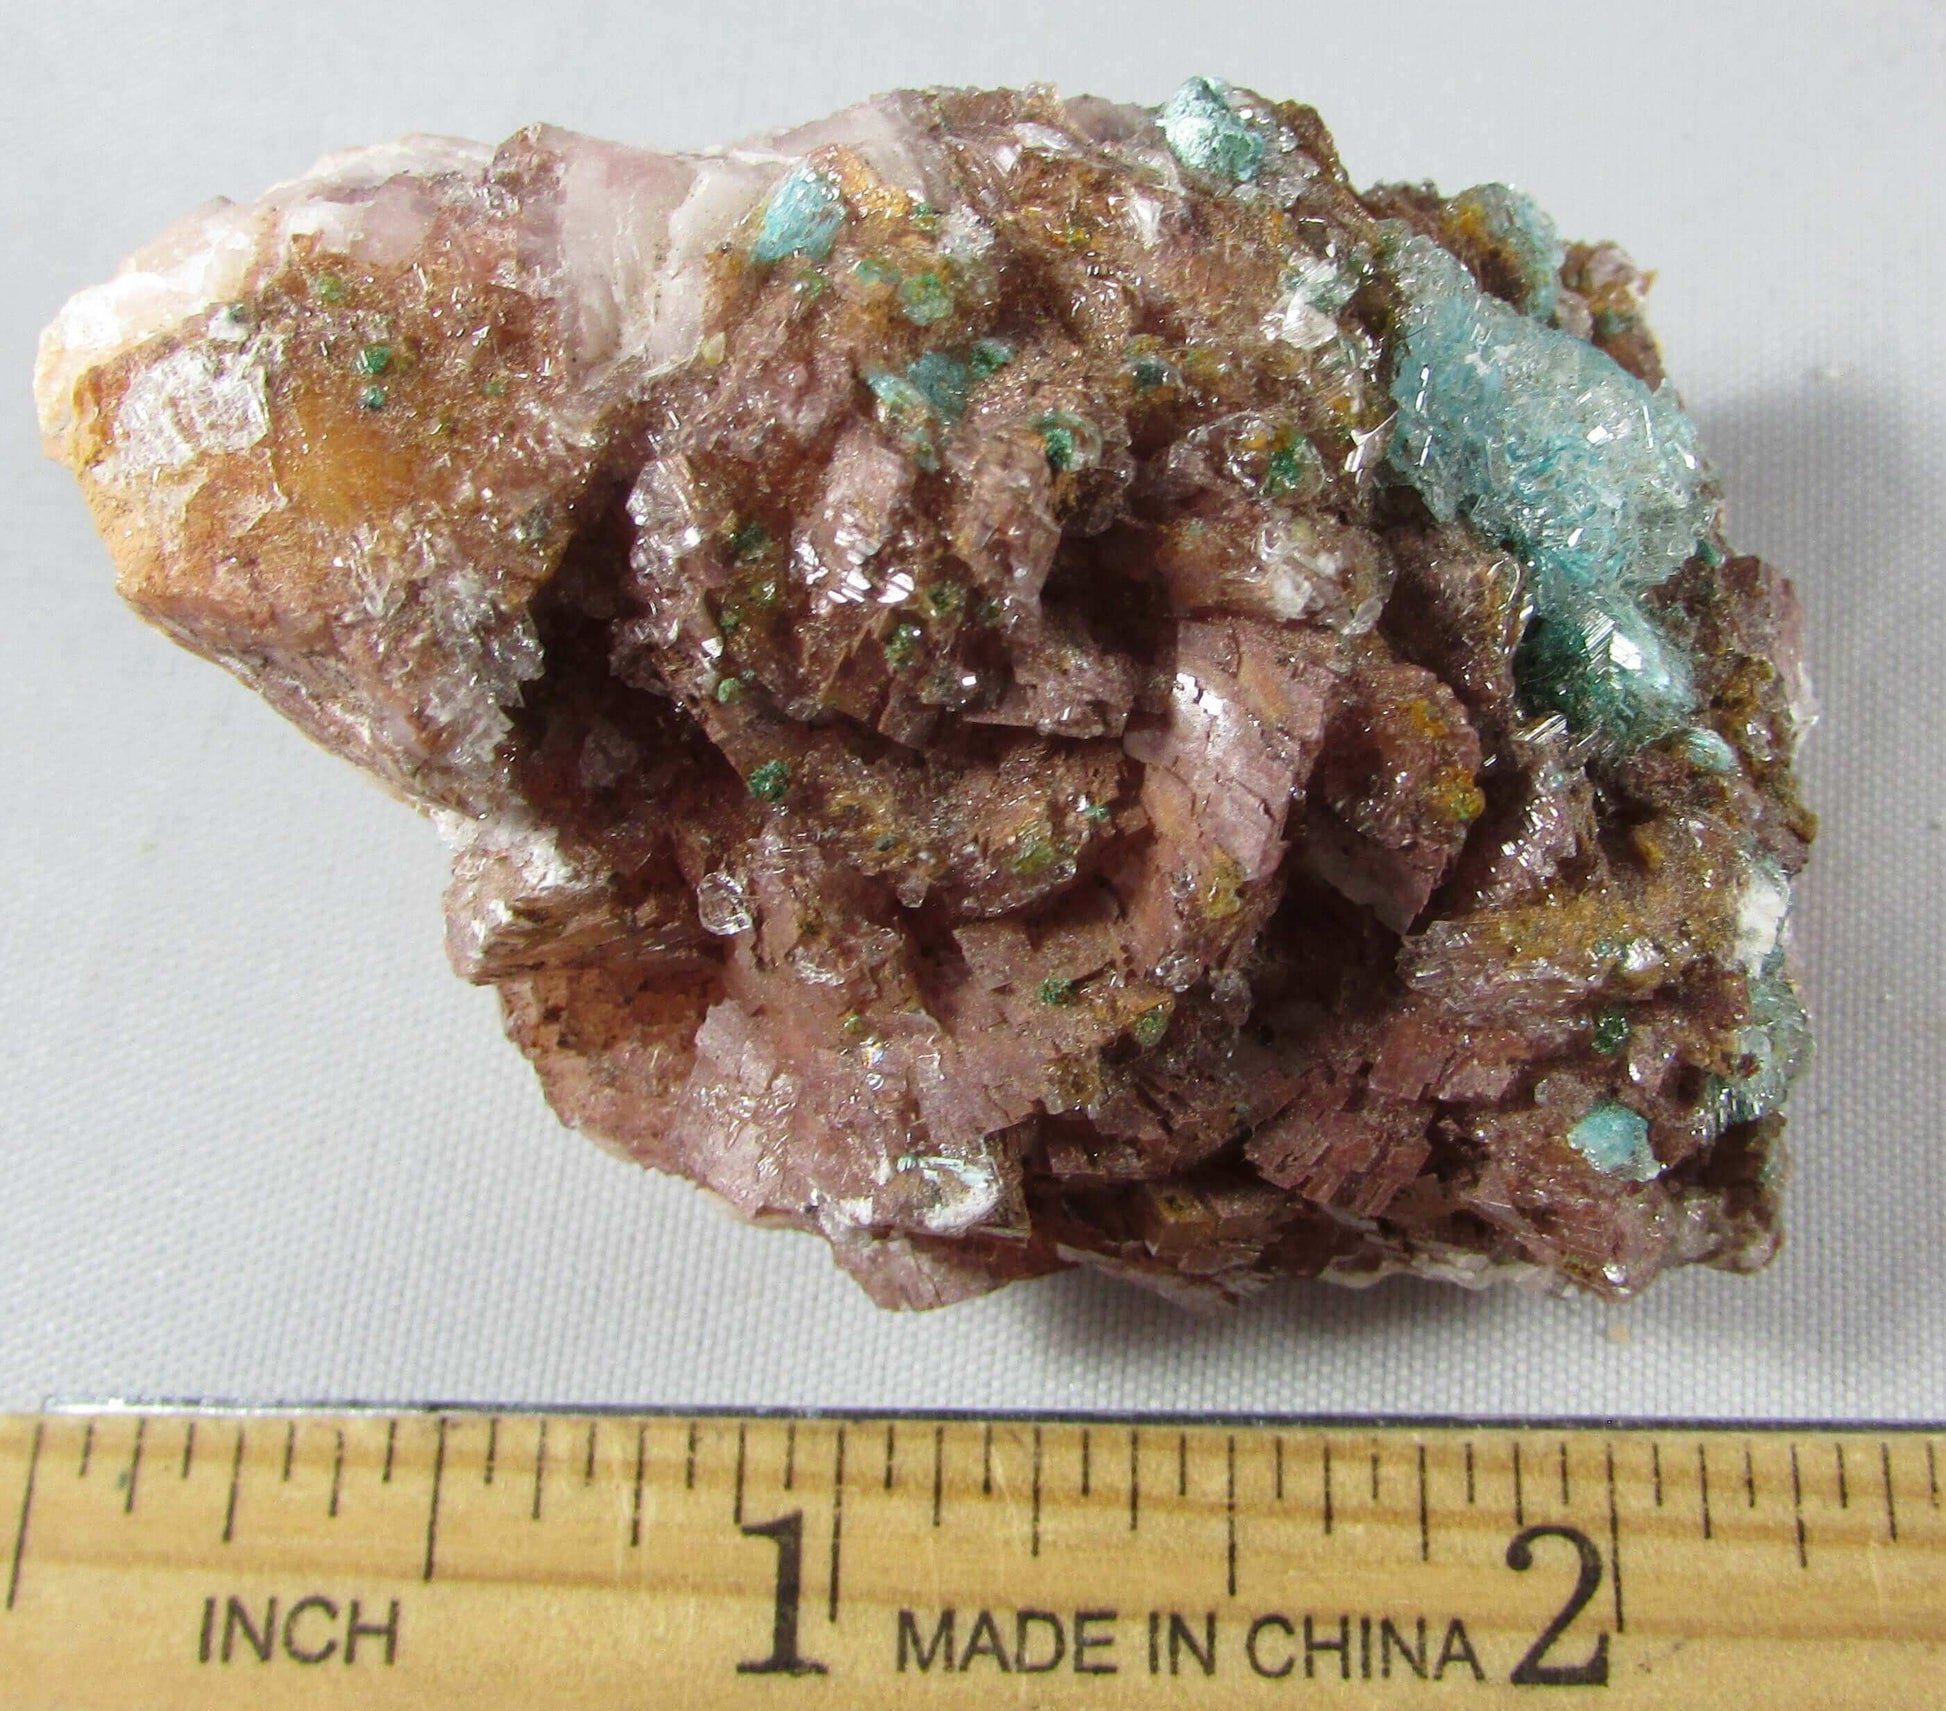 dolomite rosasite rough crystal morocco minerals